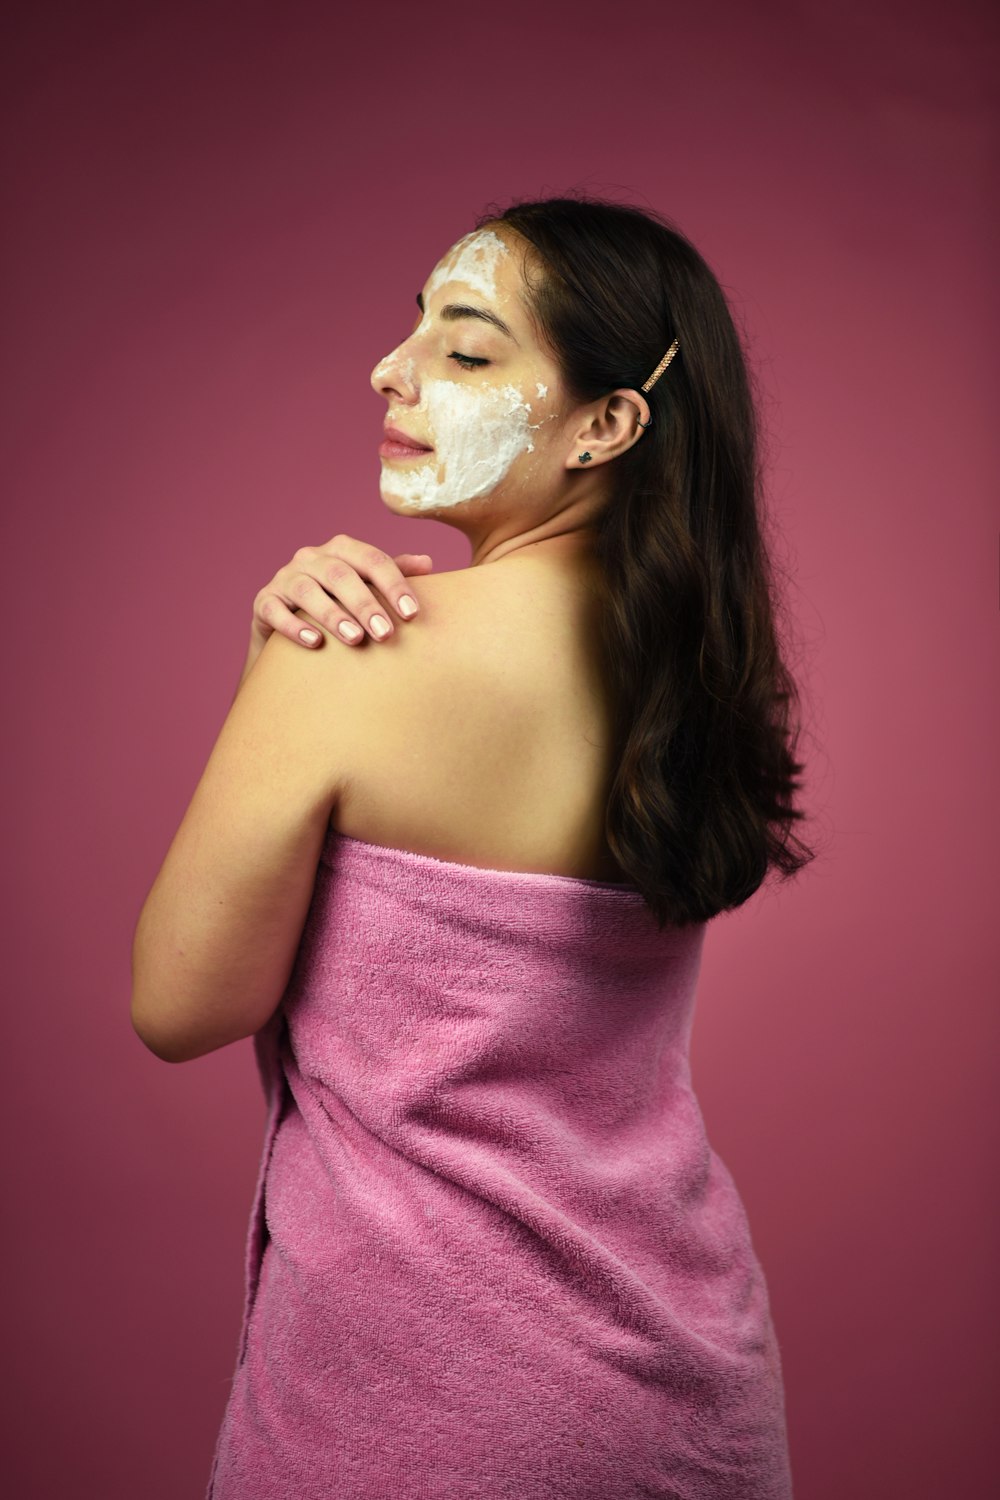 woman looking over her left shoulder wearing pink towel and white cream mask